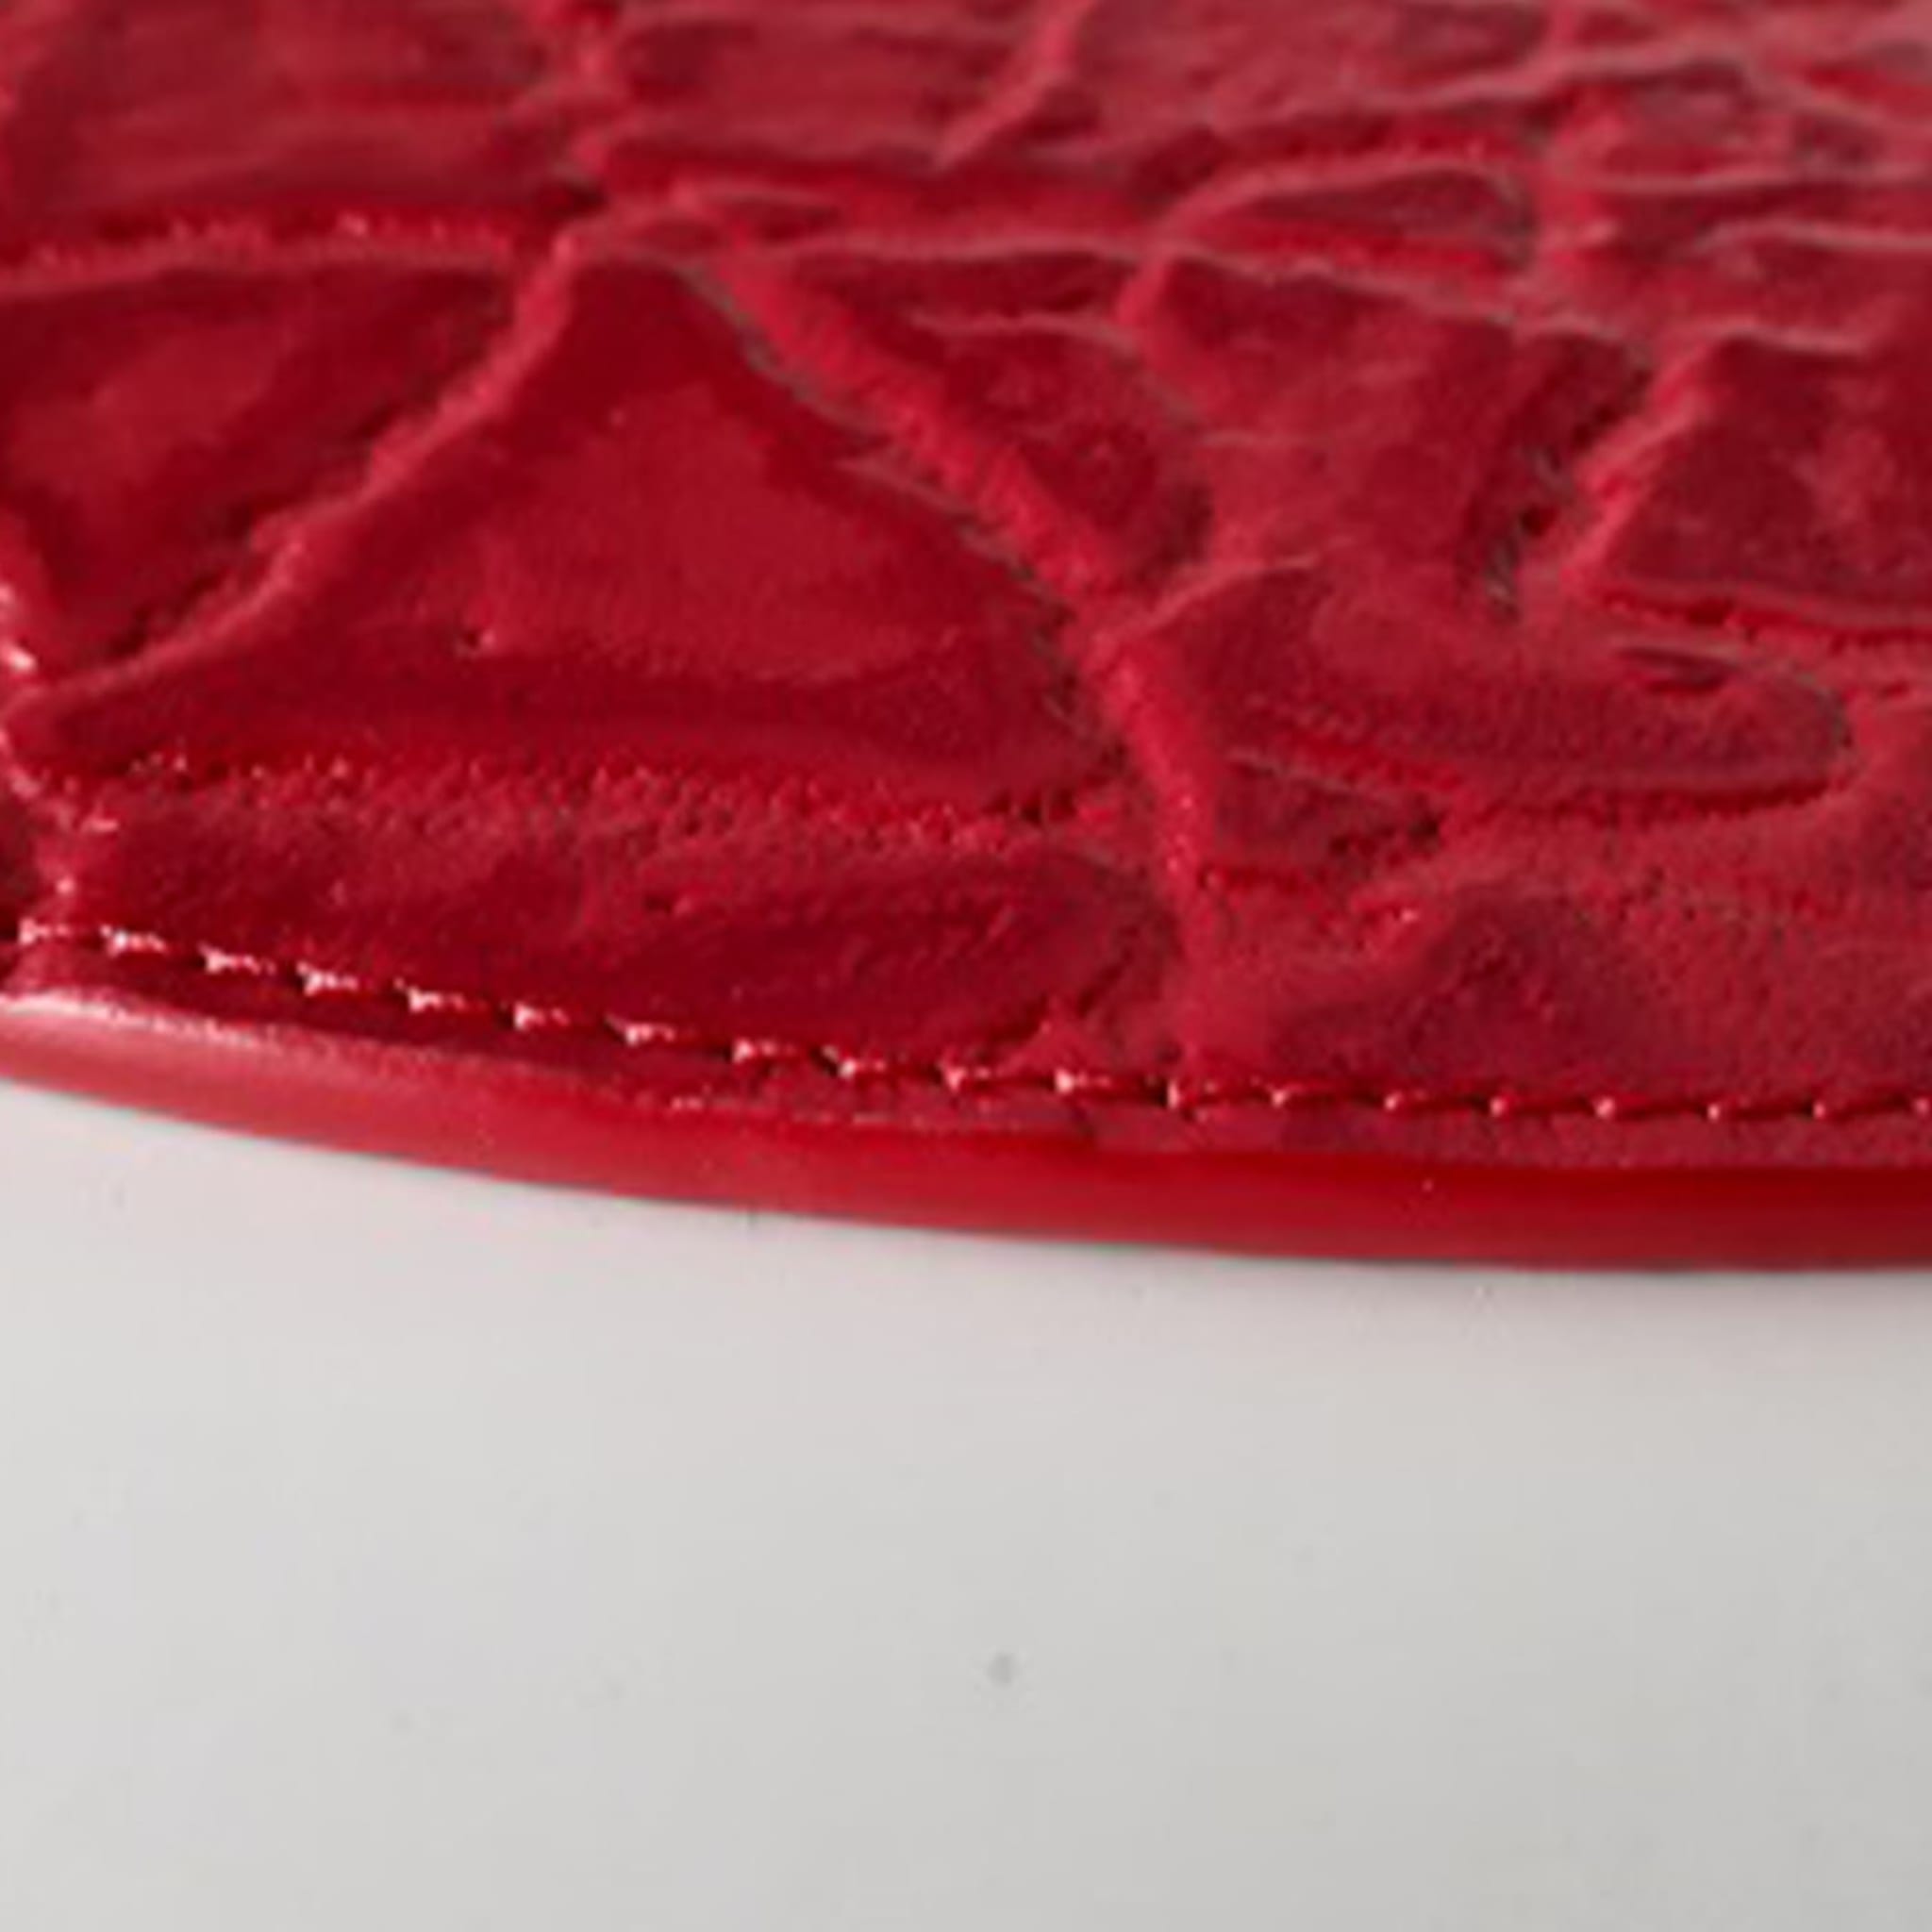 Tanzania Extra-Small Set of 2 Red Leather Placemats - Alternative view 4